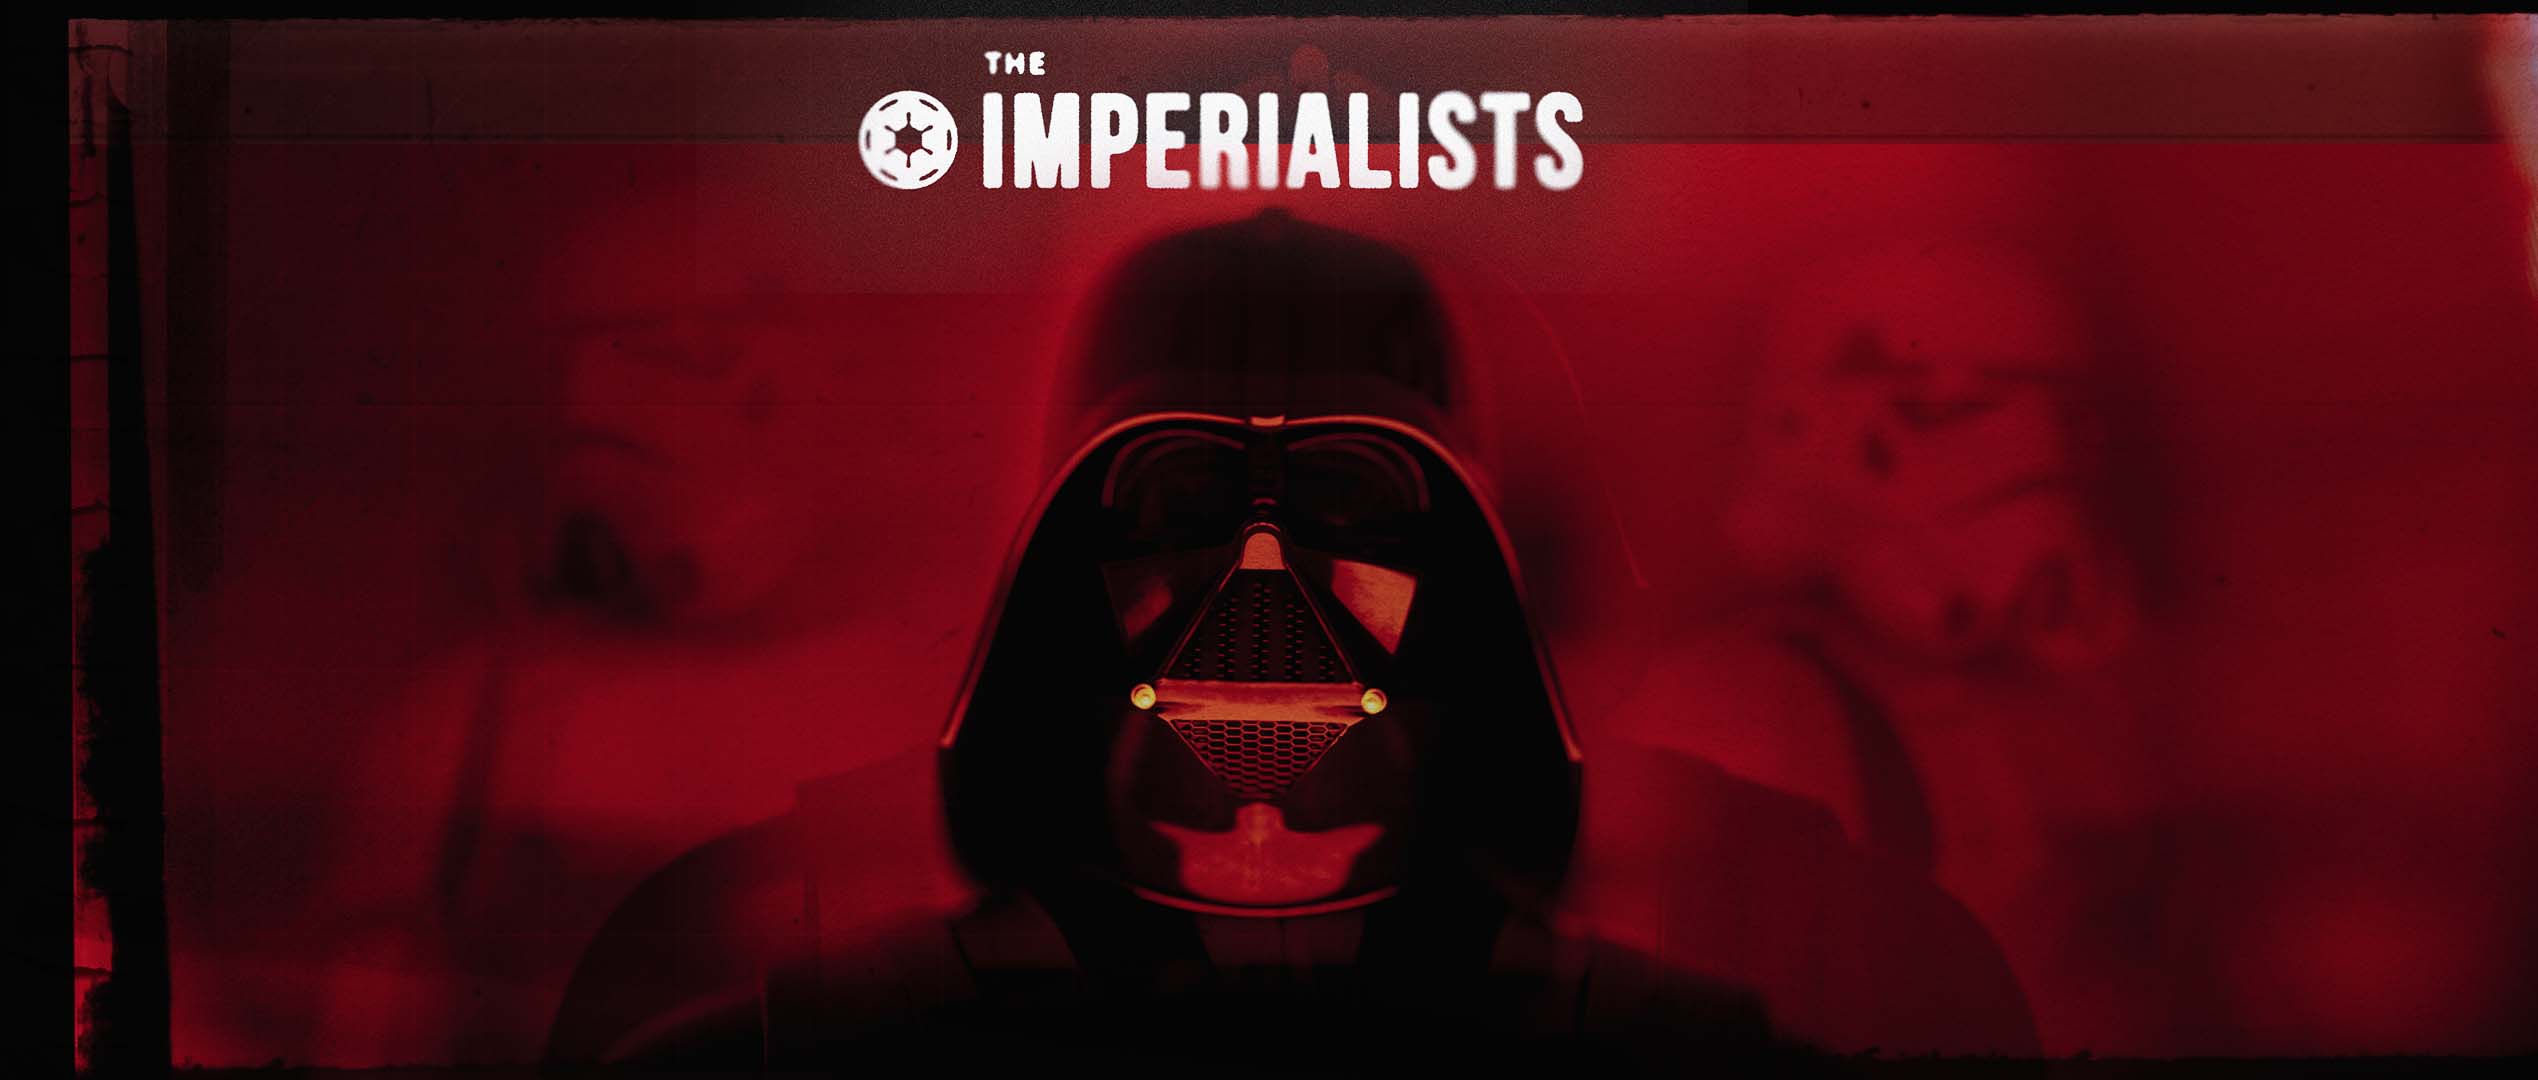 The Imperialists